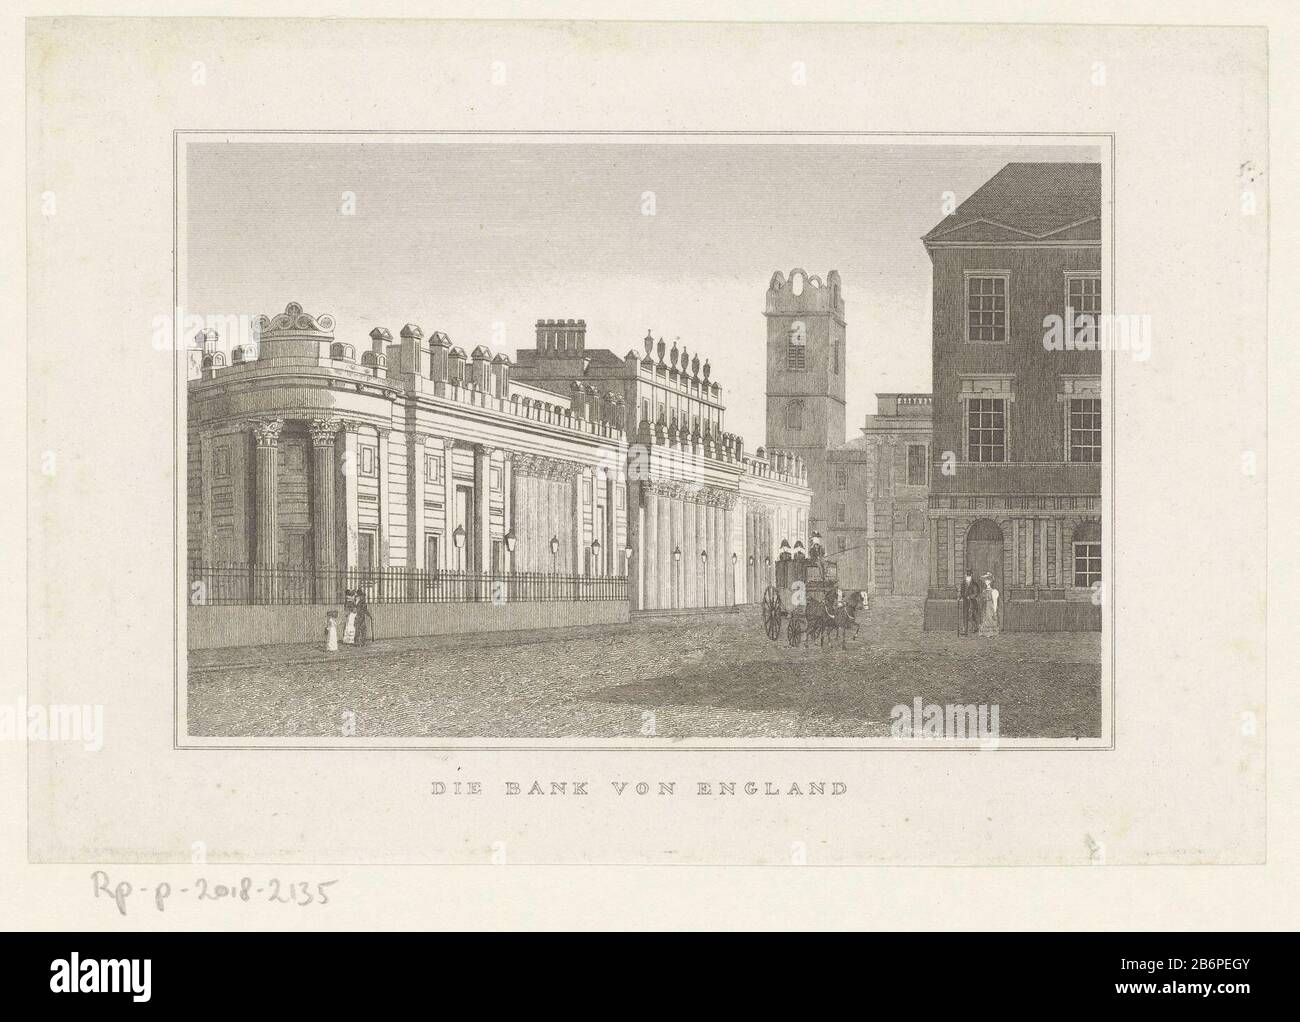 Gezicht op de Bank of England, te Londen Die Bank von England in London (titel op object) View of the Bank of England, to LondenDie Bank von England in London (title object) Object type: picture Item number: RP-P-2018-2135 Inscriptions / Brands: collector's mark, verso, stamped: Lugt 2228 Manufacturer : printmaker: anonymous (listed building) publisher: Bibliographisches Institut (listed property) Place manufacture: Hildburghausen Dating: 1828 - 1874 Material: paper Technique: steel engra dimensions: plate edge: h 148 mm × W 195 mm Subject: bank where: Bank of England Stock Photo